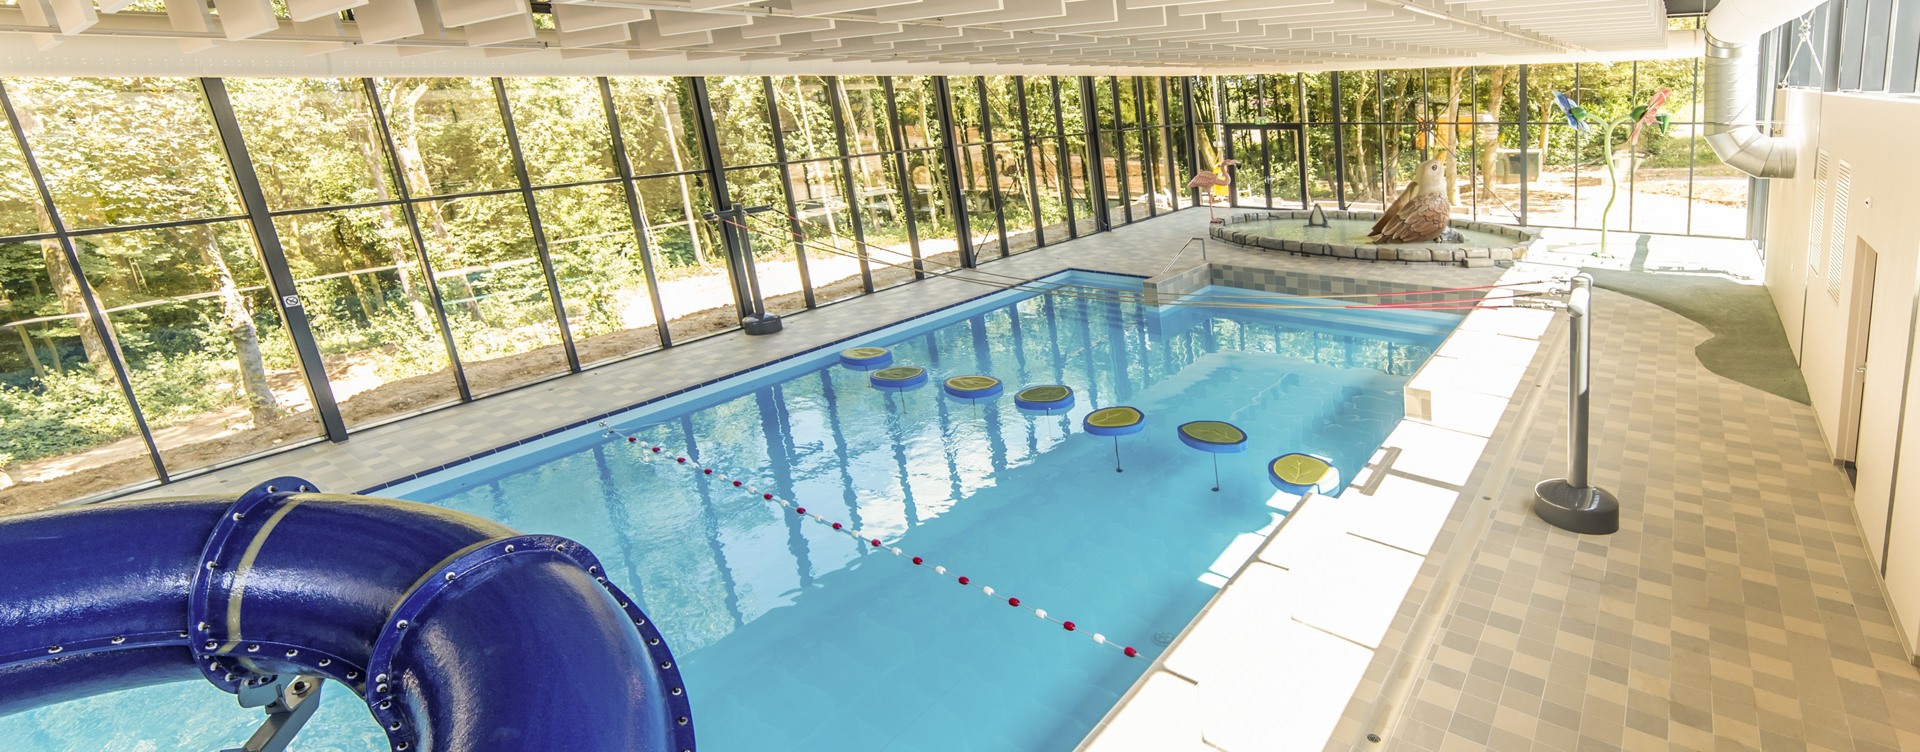 Go for a swim in the heated indoor swimming-pool 
during your stay